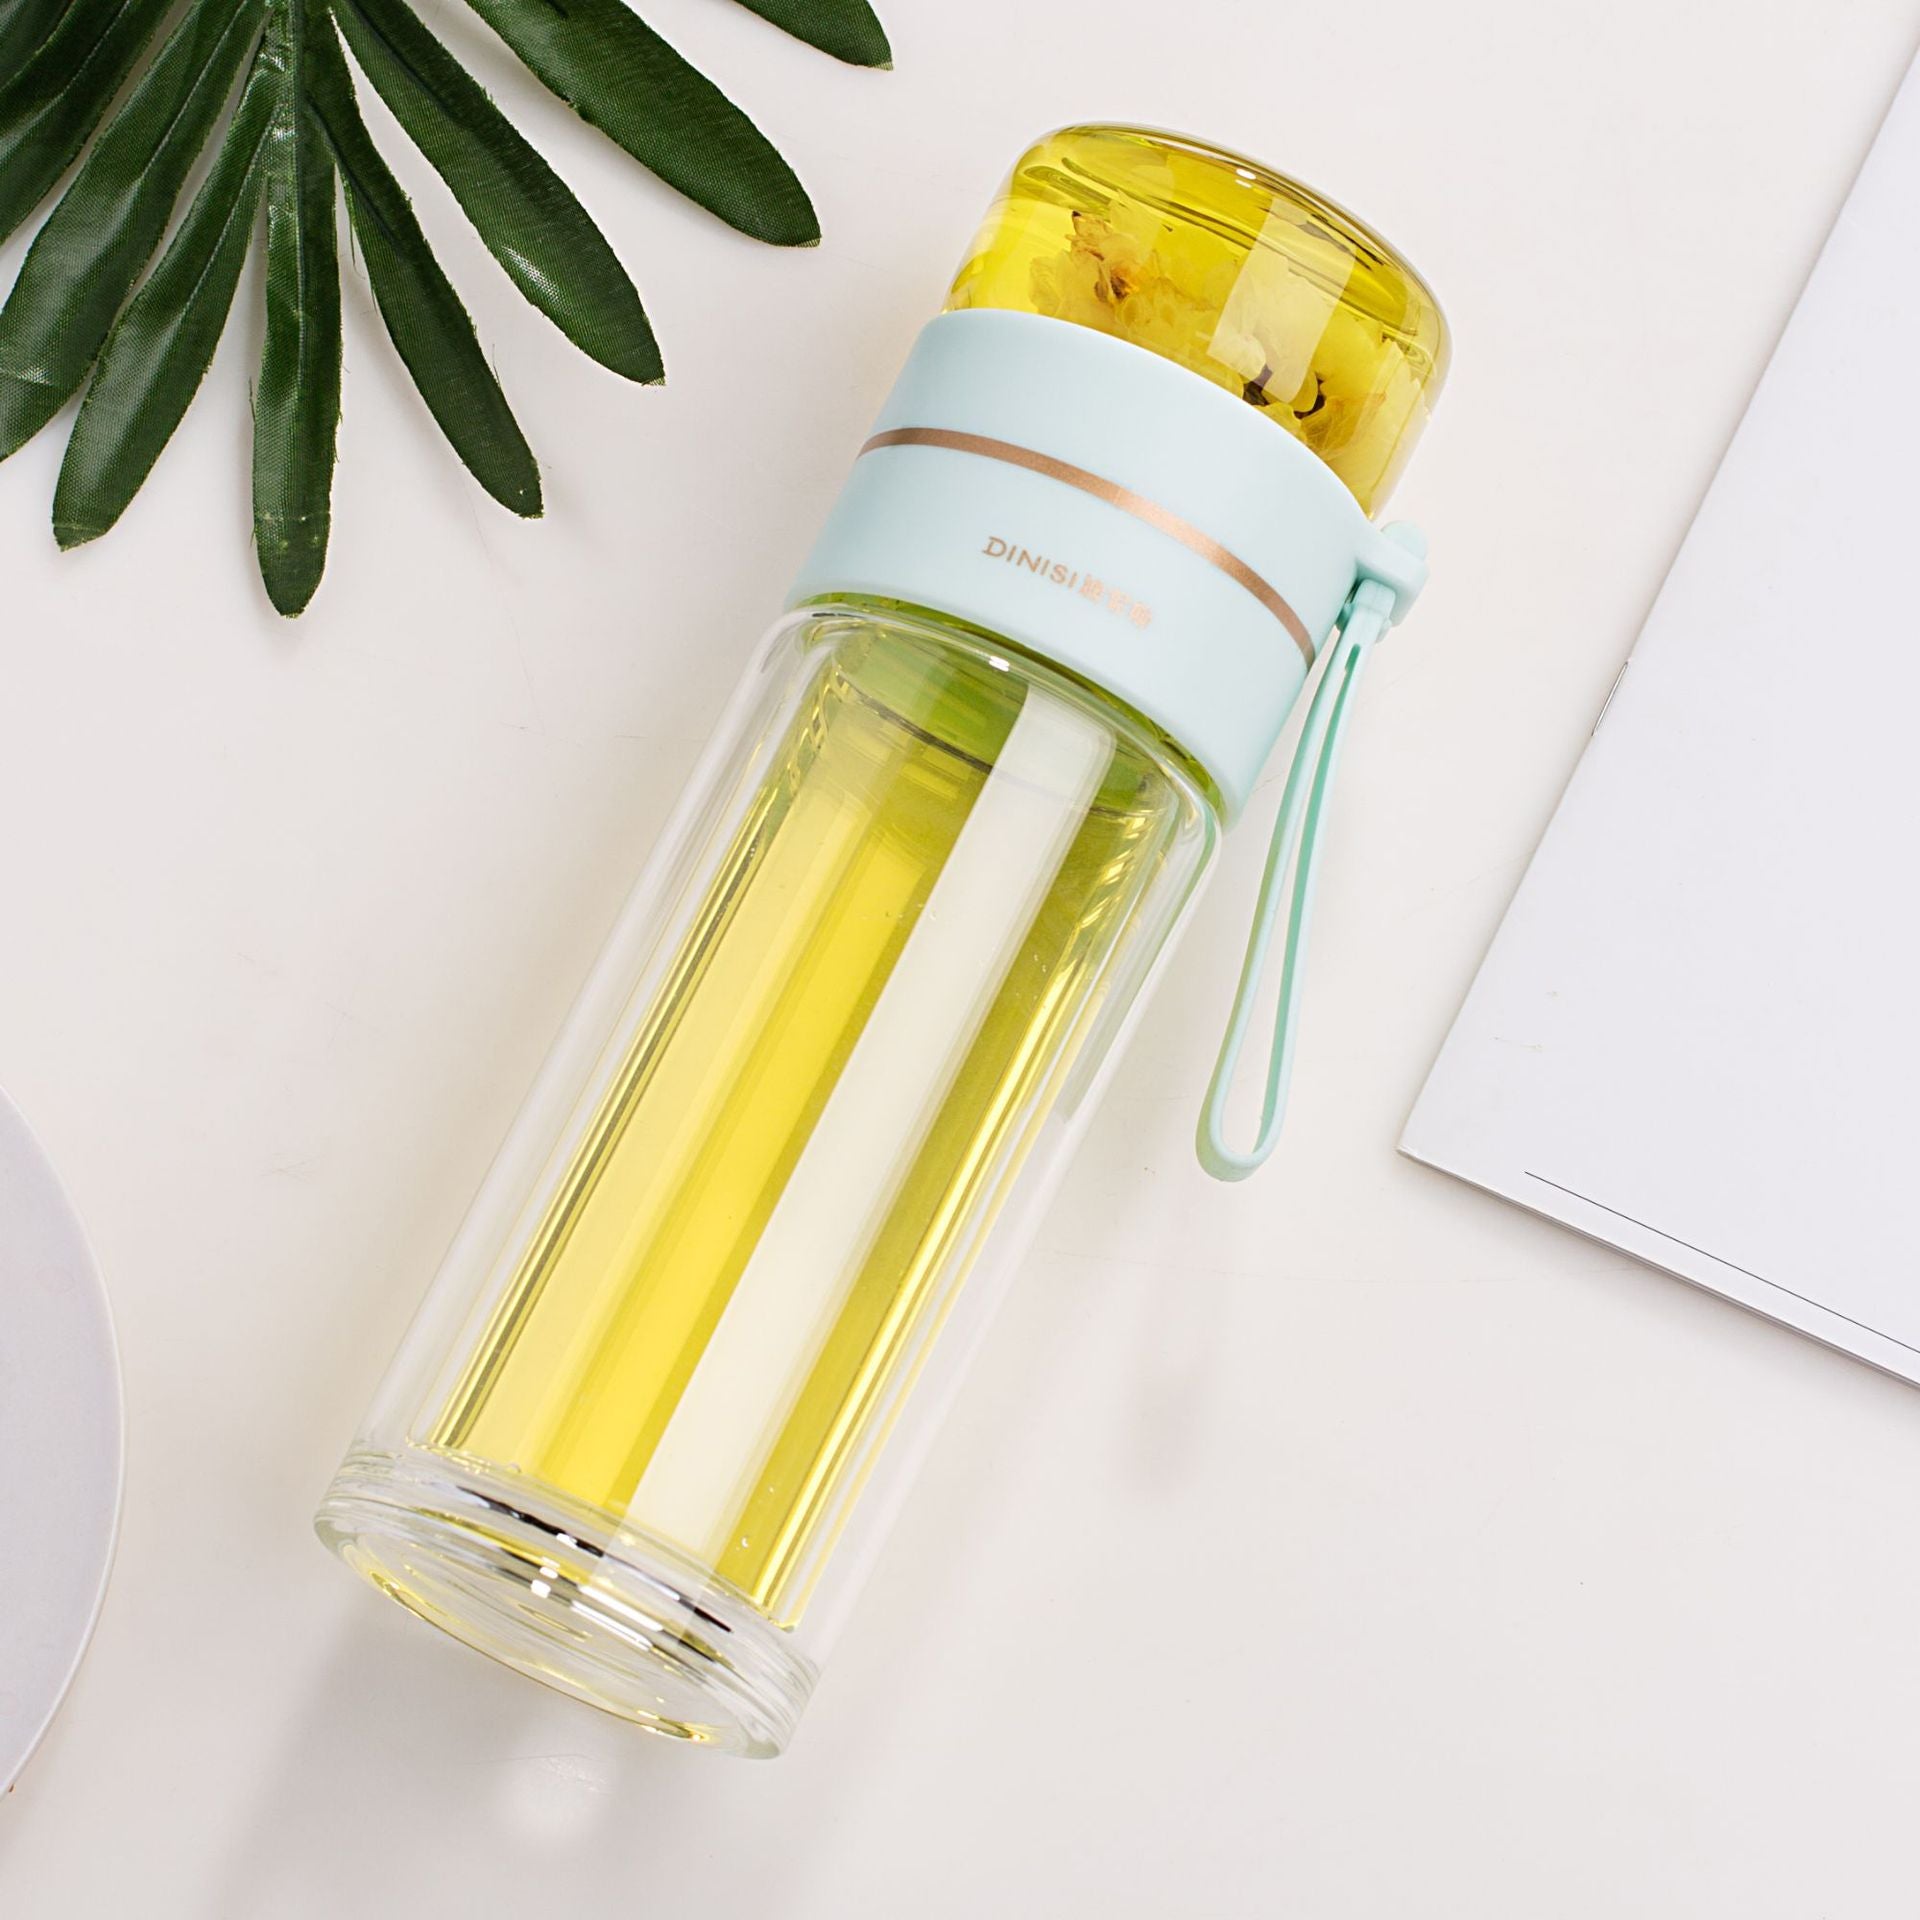 Double Wall Glass Water Bottle With Tea Infuser and Filter - Body By J'ne